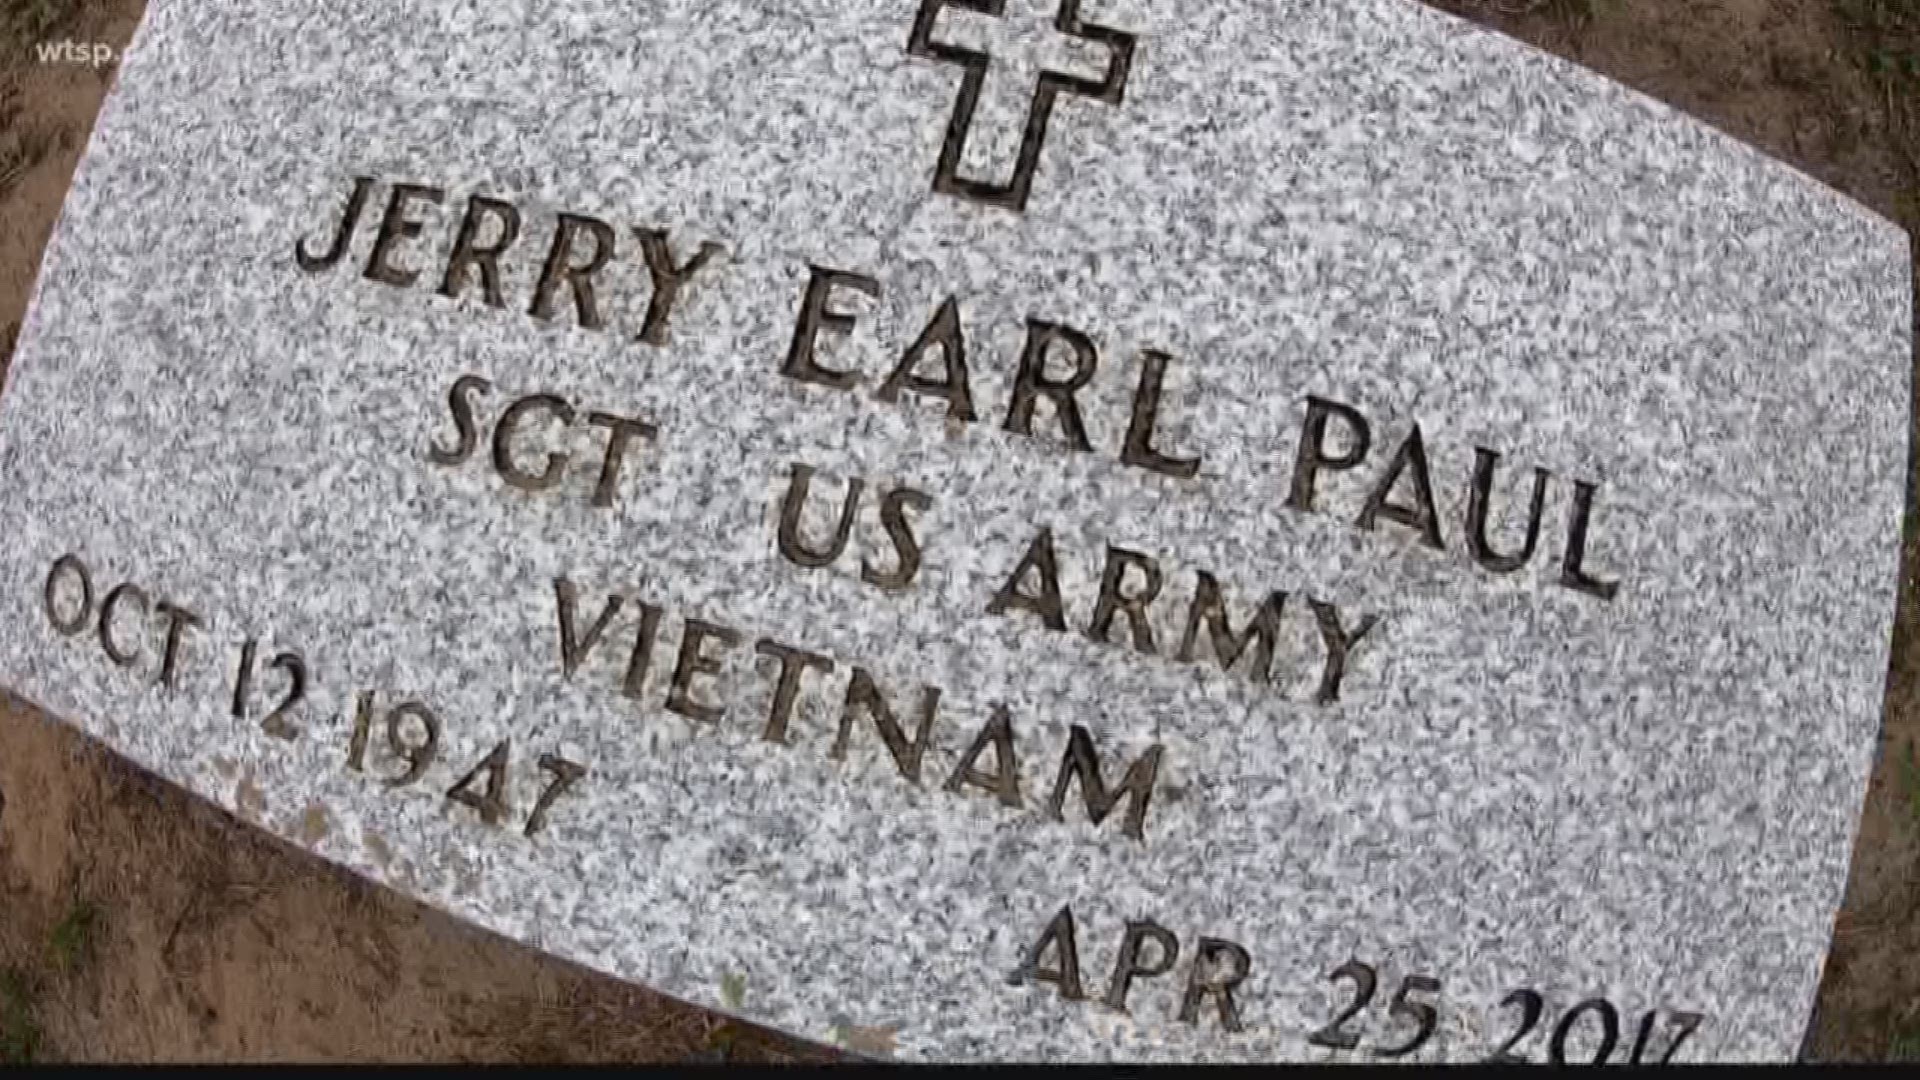 Burying a loved one is never easy, and one Bartow family felt comfort in knowing their father, Jerry Paul, would rest in peace. What they didn't know is they'd have to bury him again.